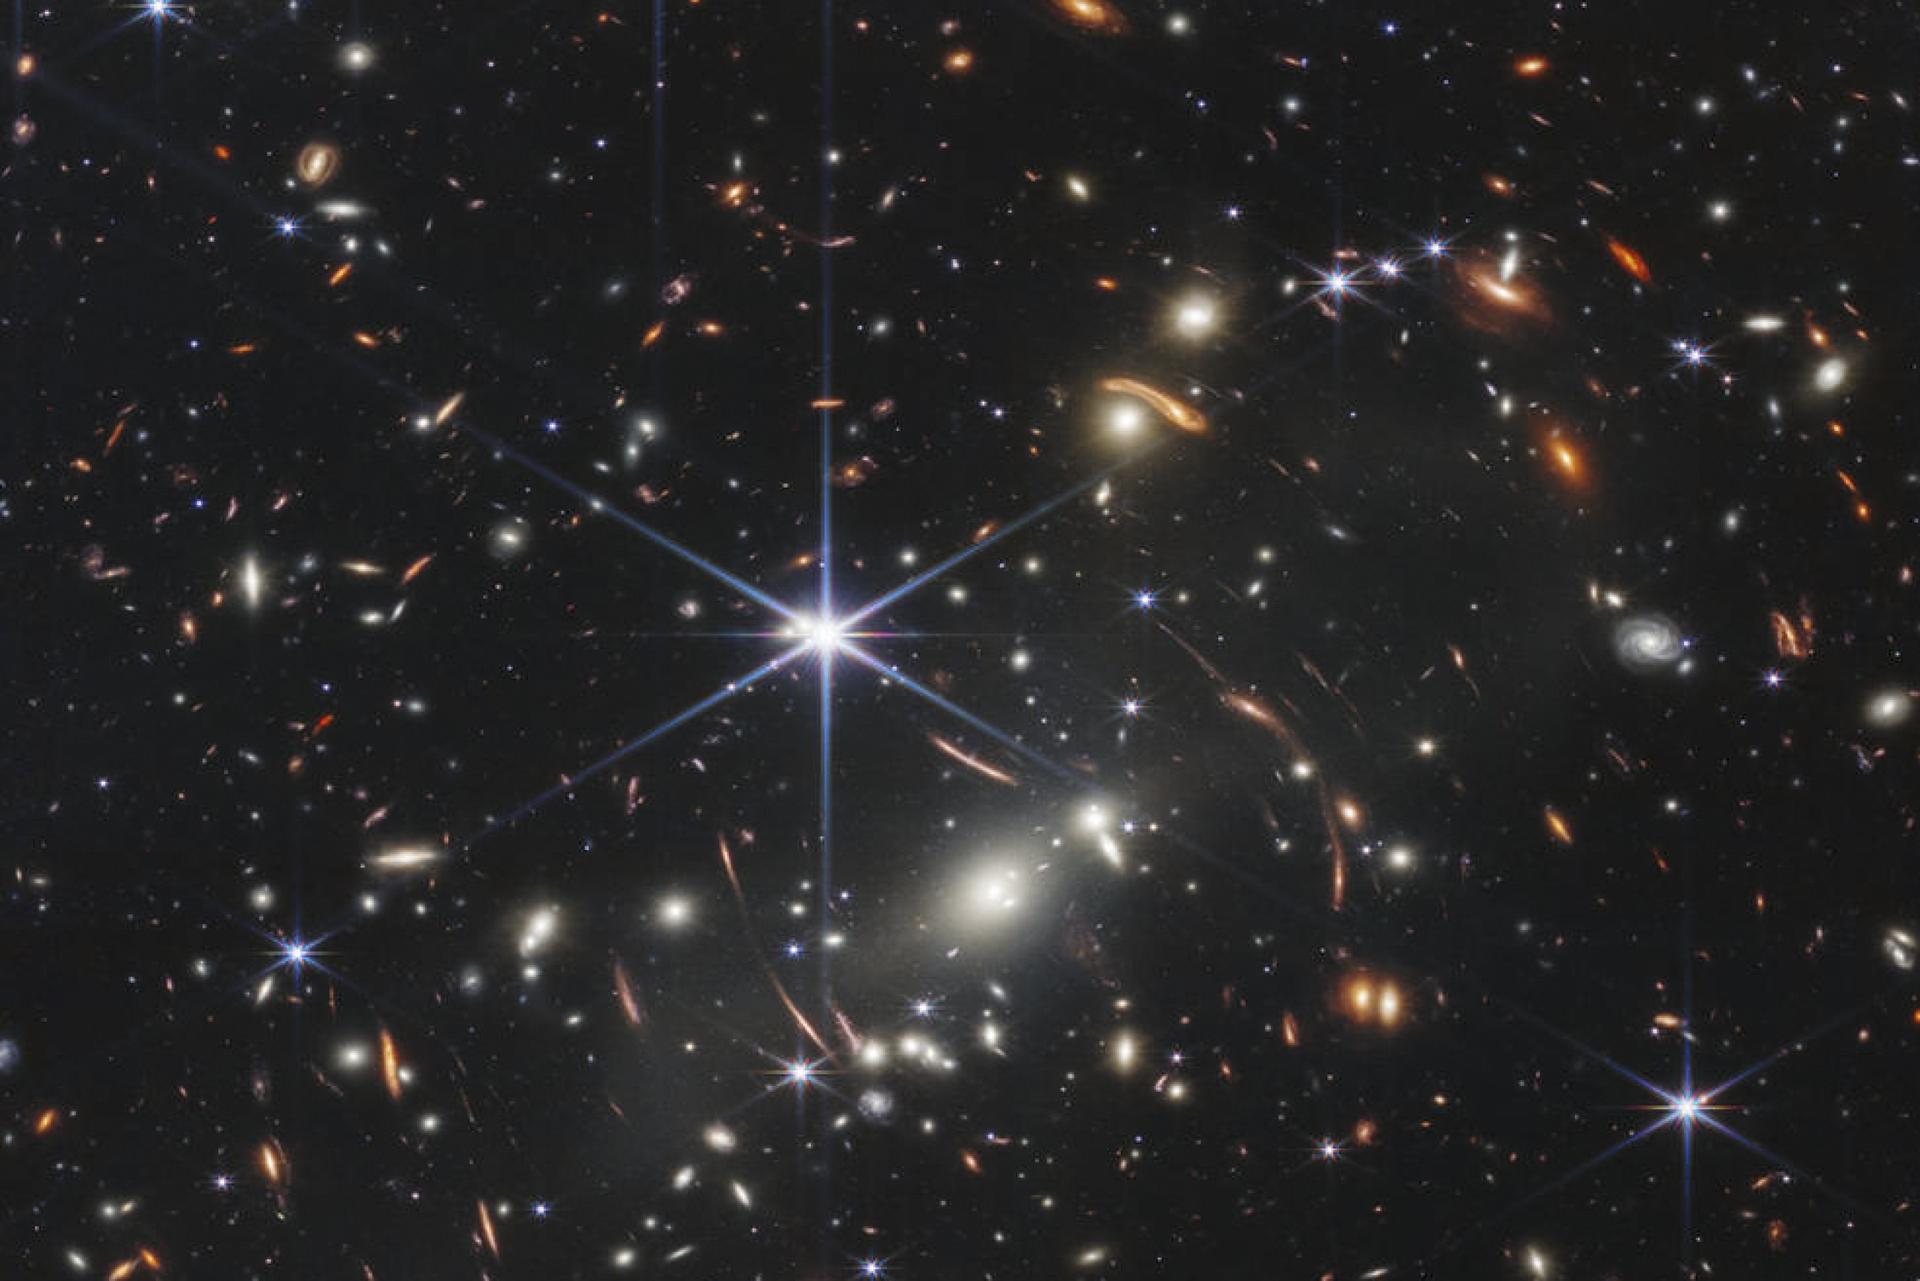 This image shows galaxy cluster SMACS 0723, captured by the James Webb Space Telescope